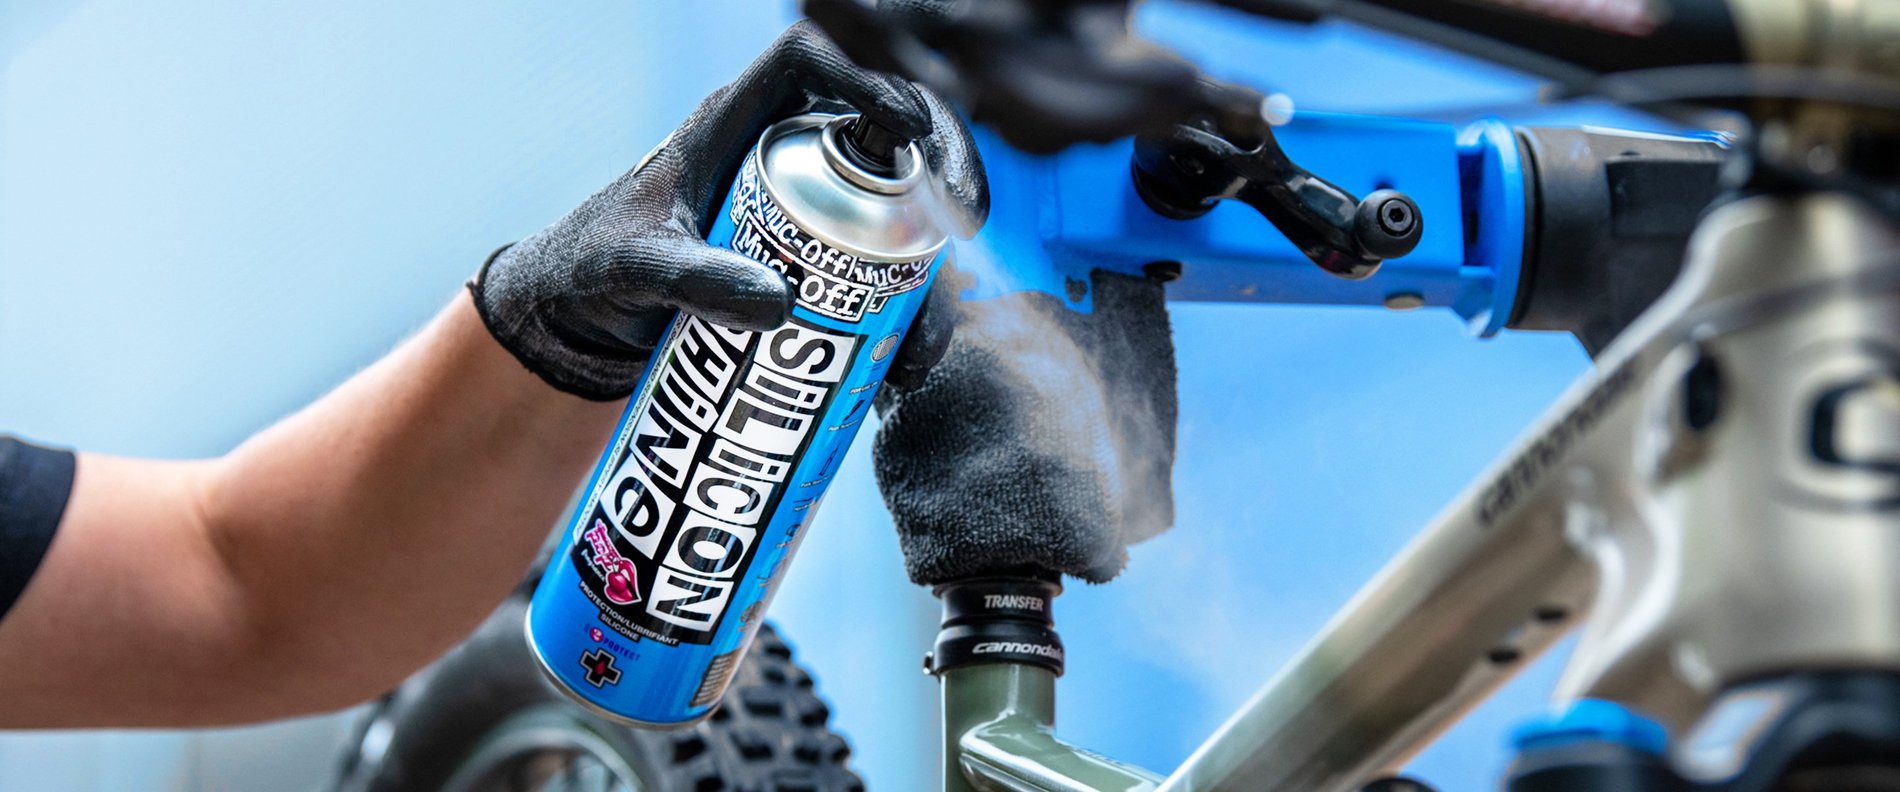 Muc-Off Silicone Shine Polish 500ml - Lubricants & Cleaning - Cycle ...